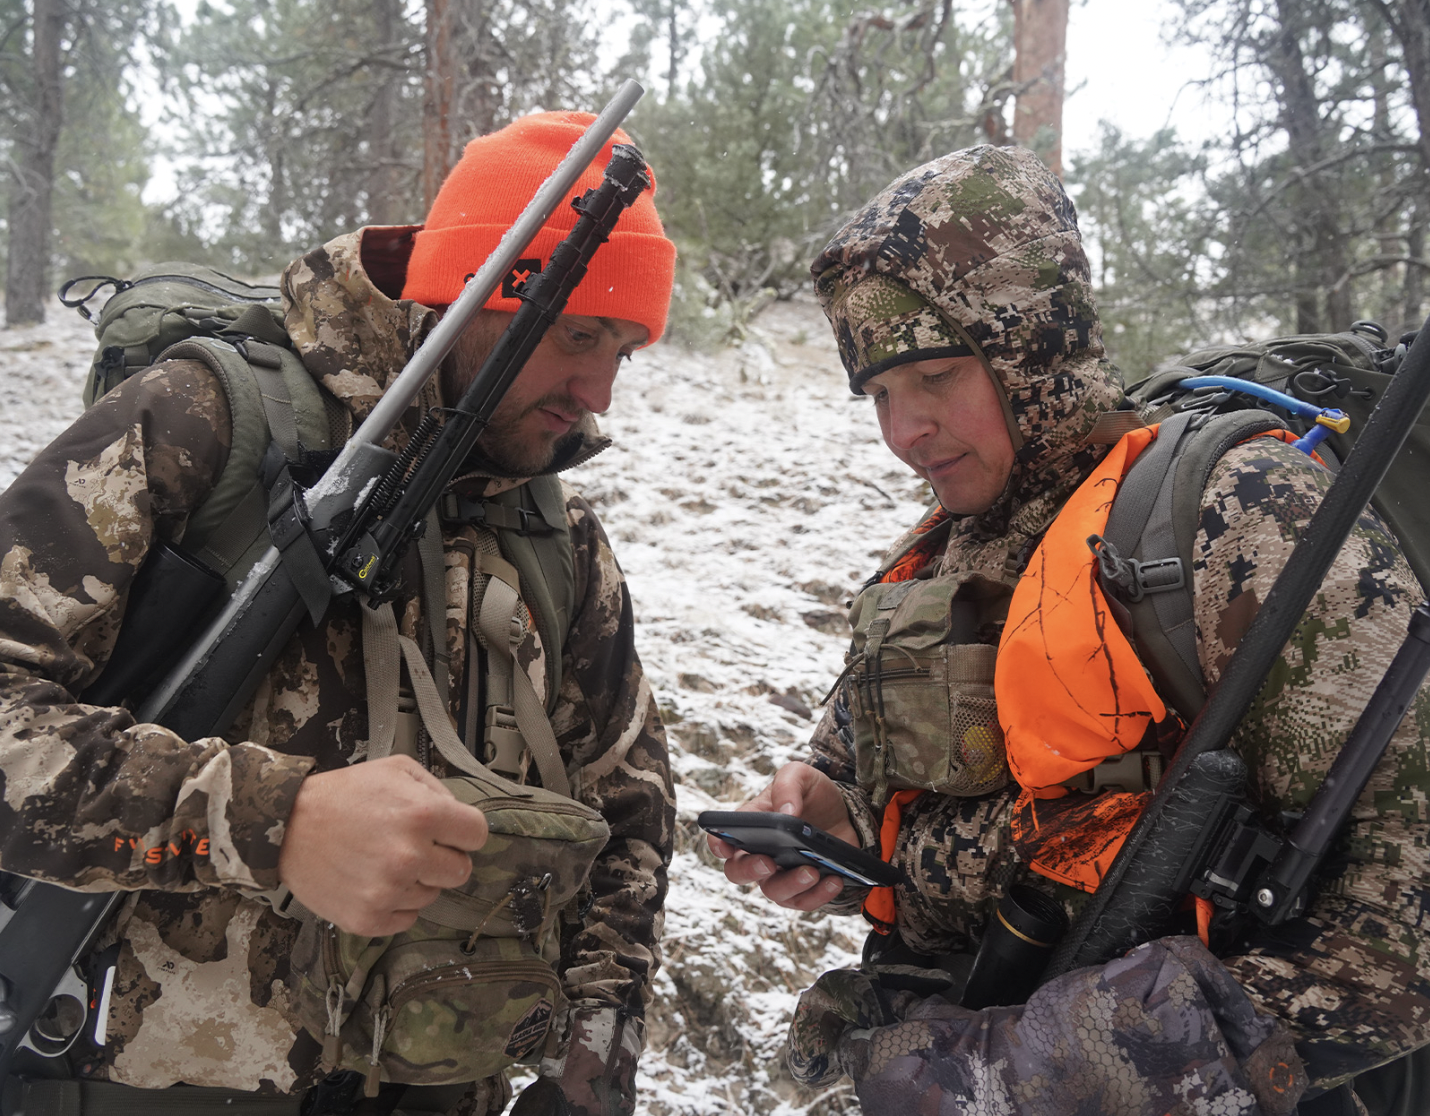 two hunters in camo looking at a hunting gps app on their phone 